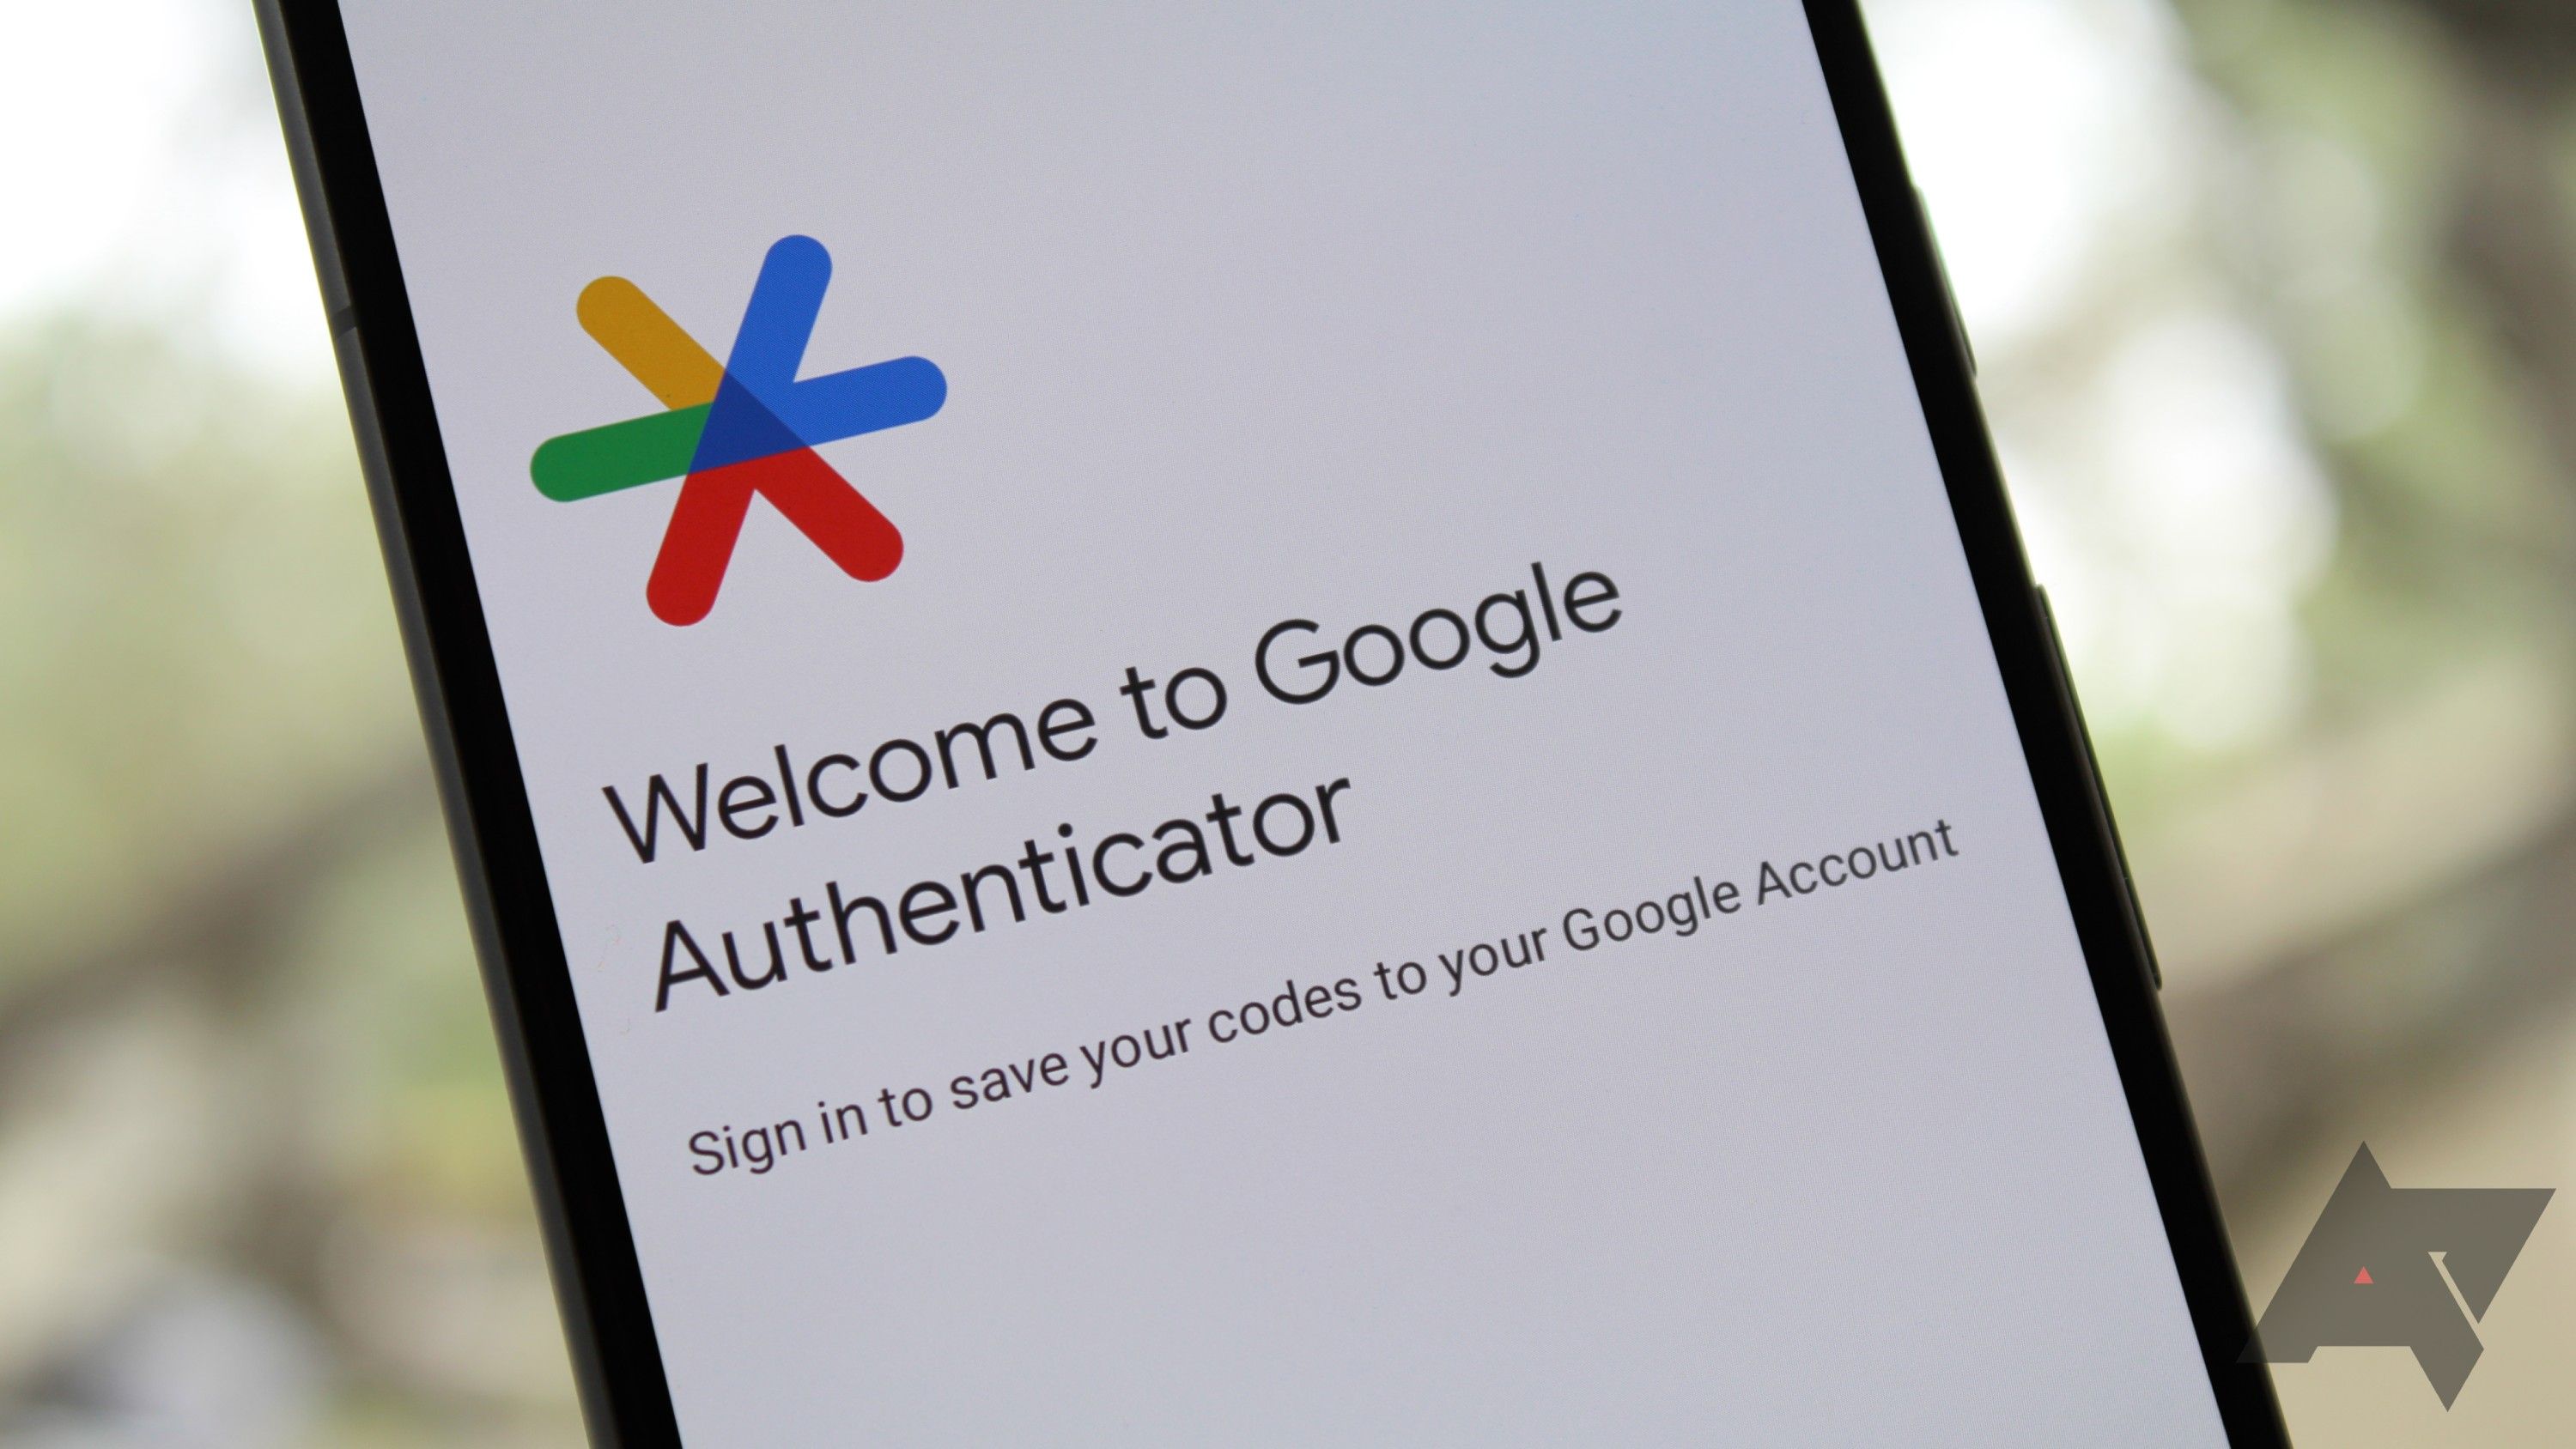 Welcome screen on a phone for the Google Authenticator app.